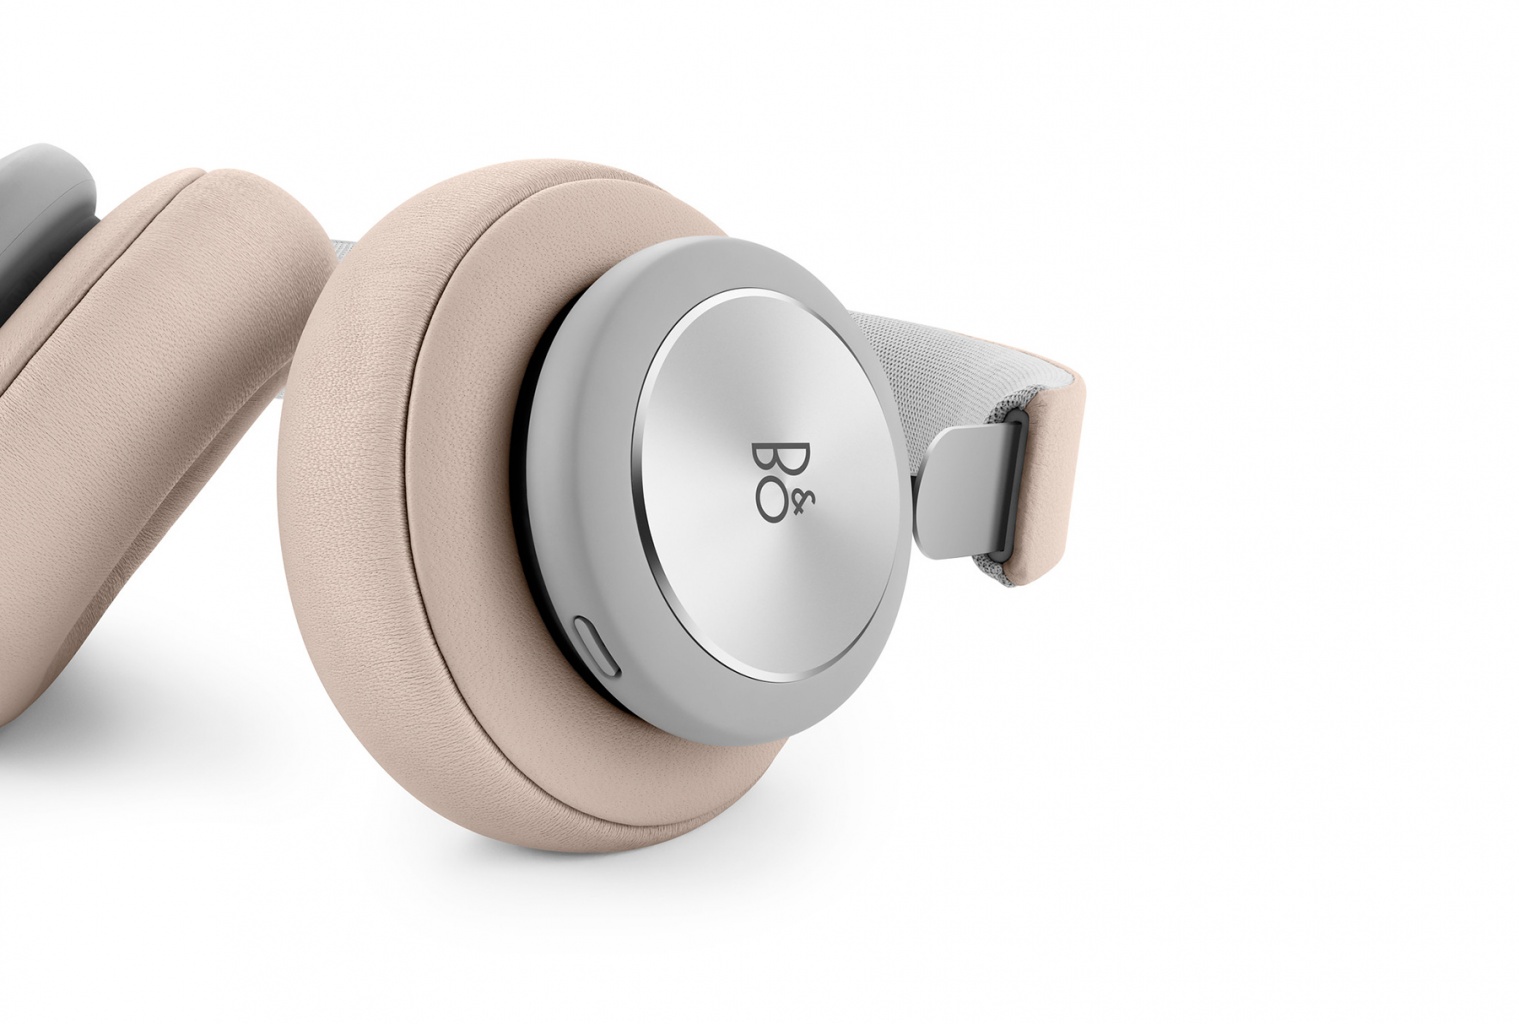 Beoplay h4